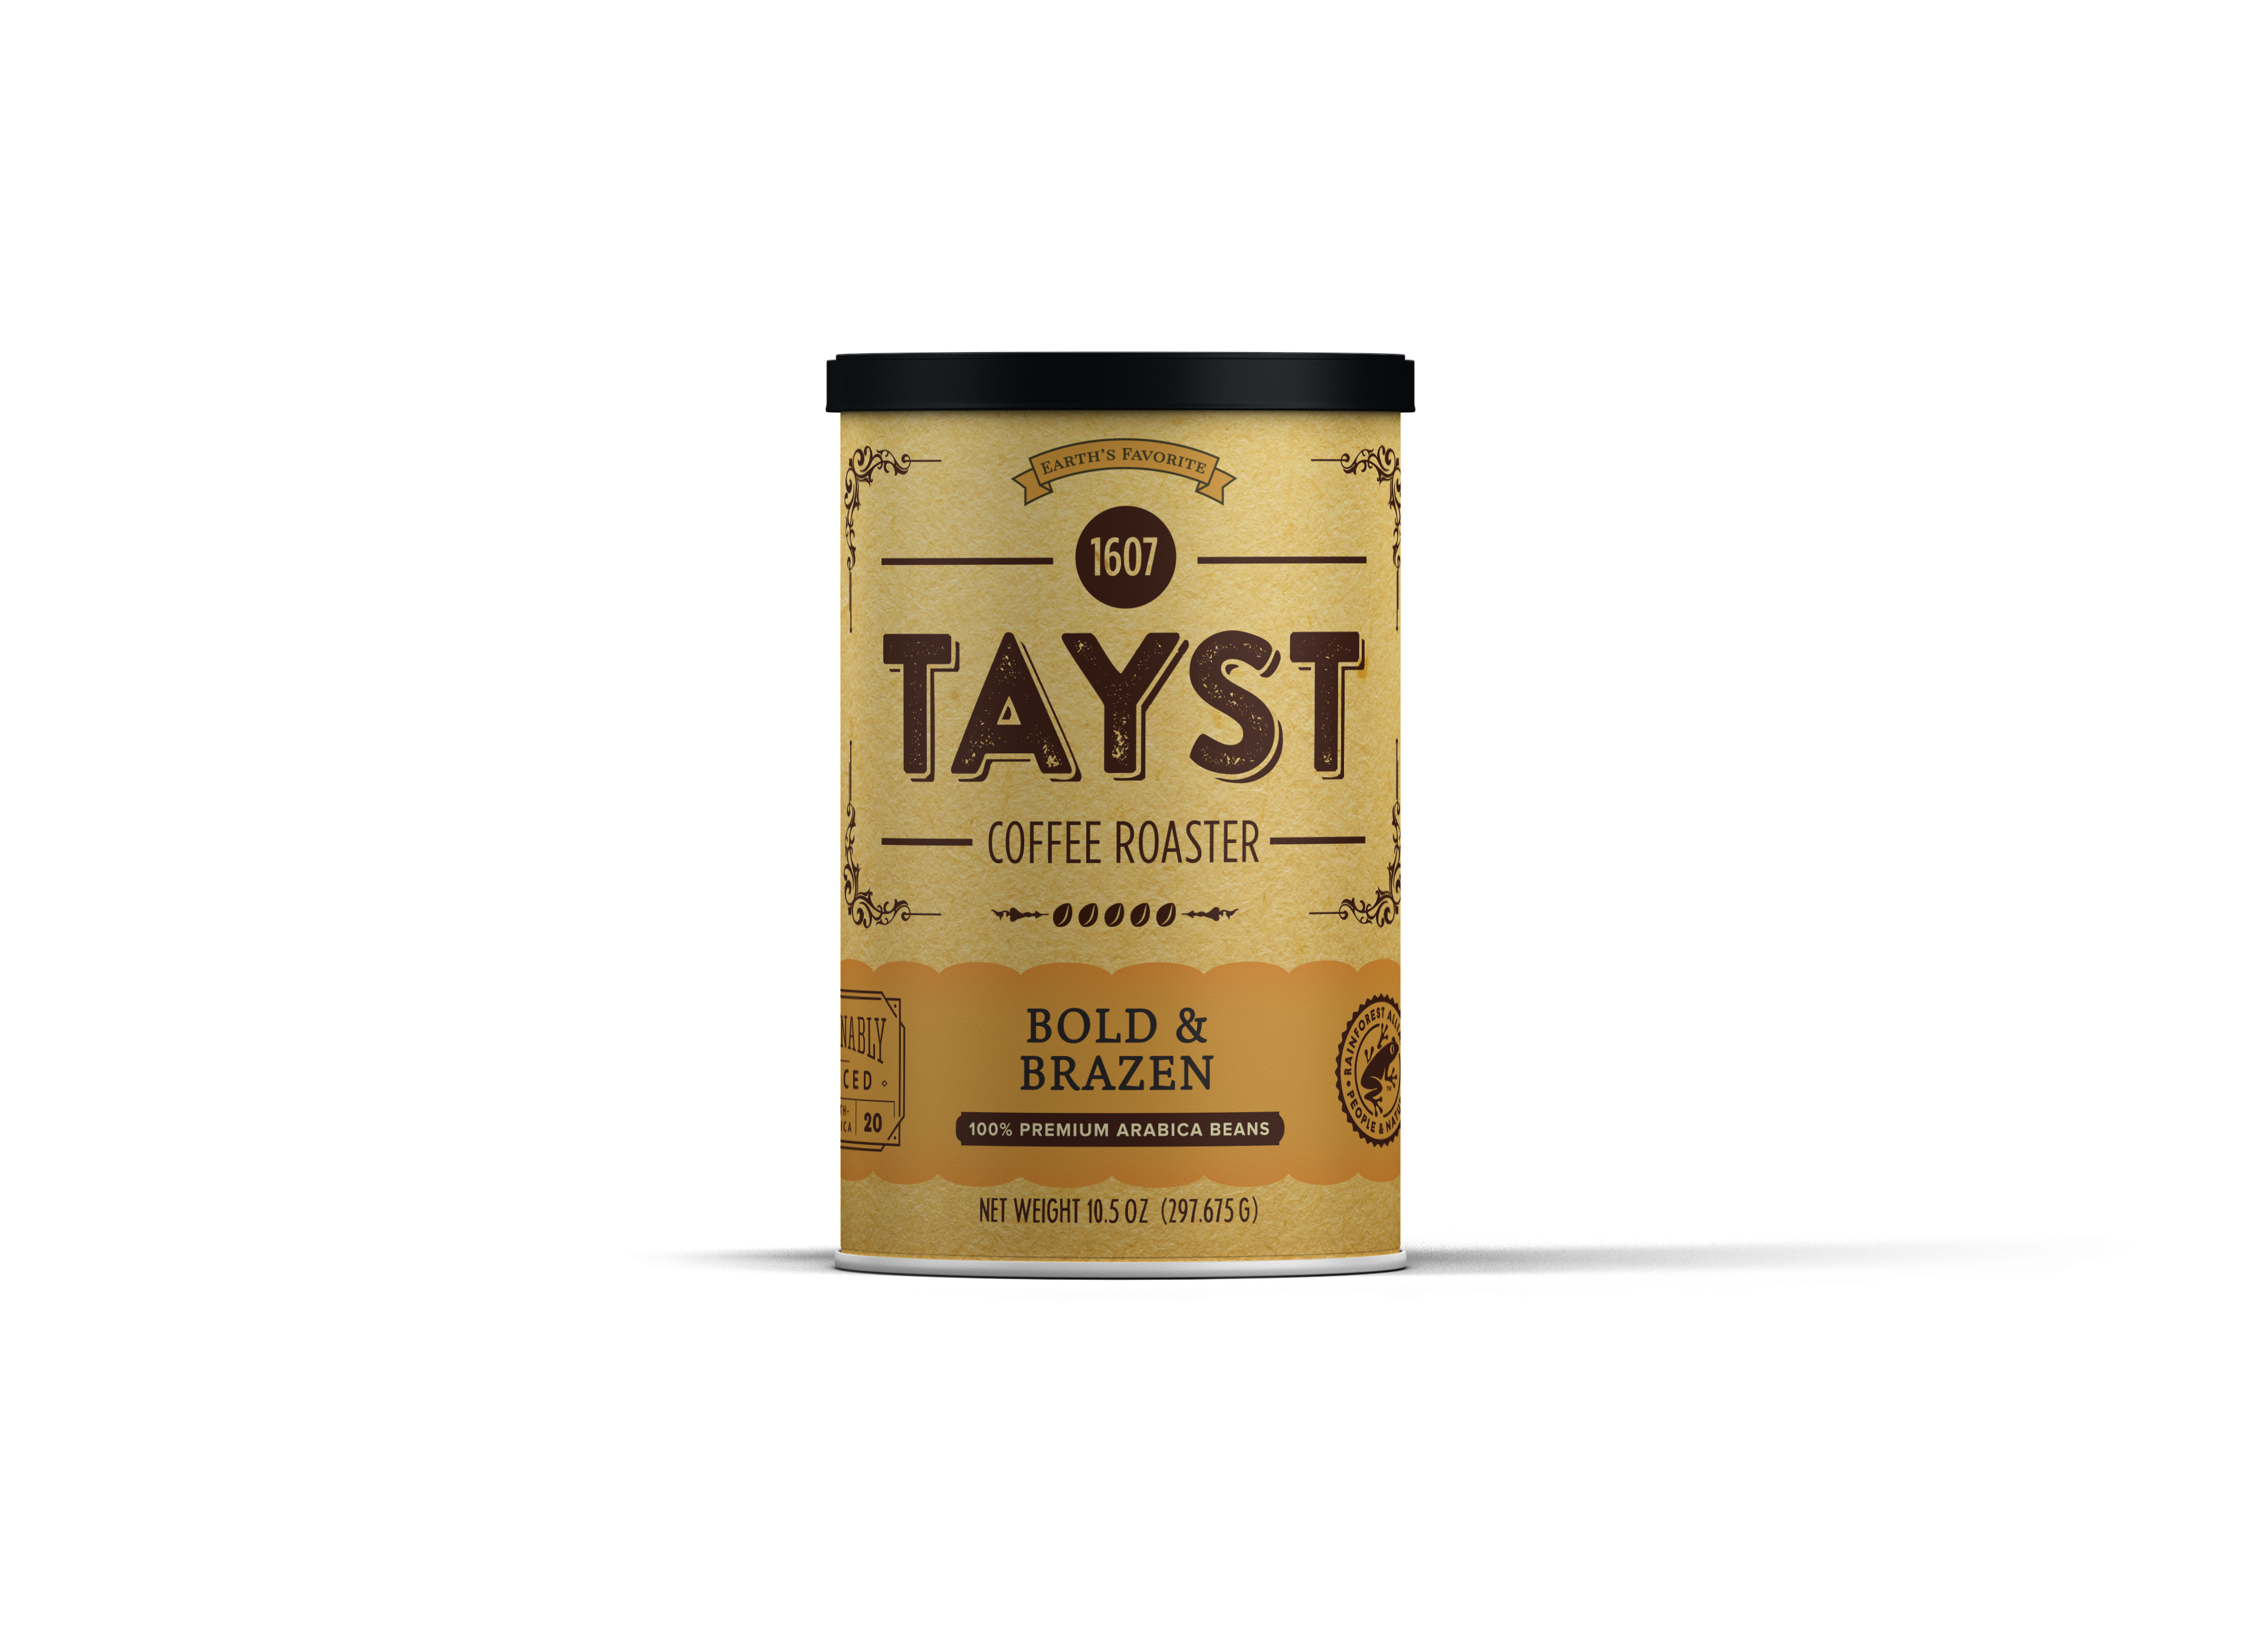 Tayst coffee can - bold and brazen